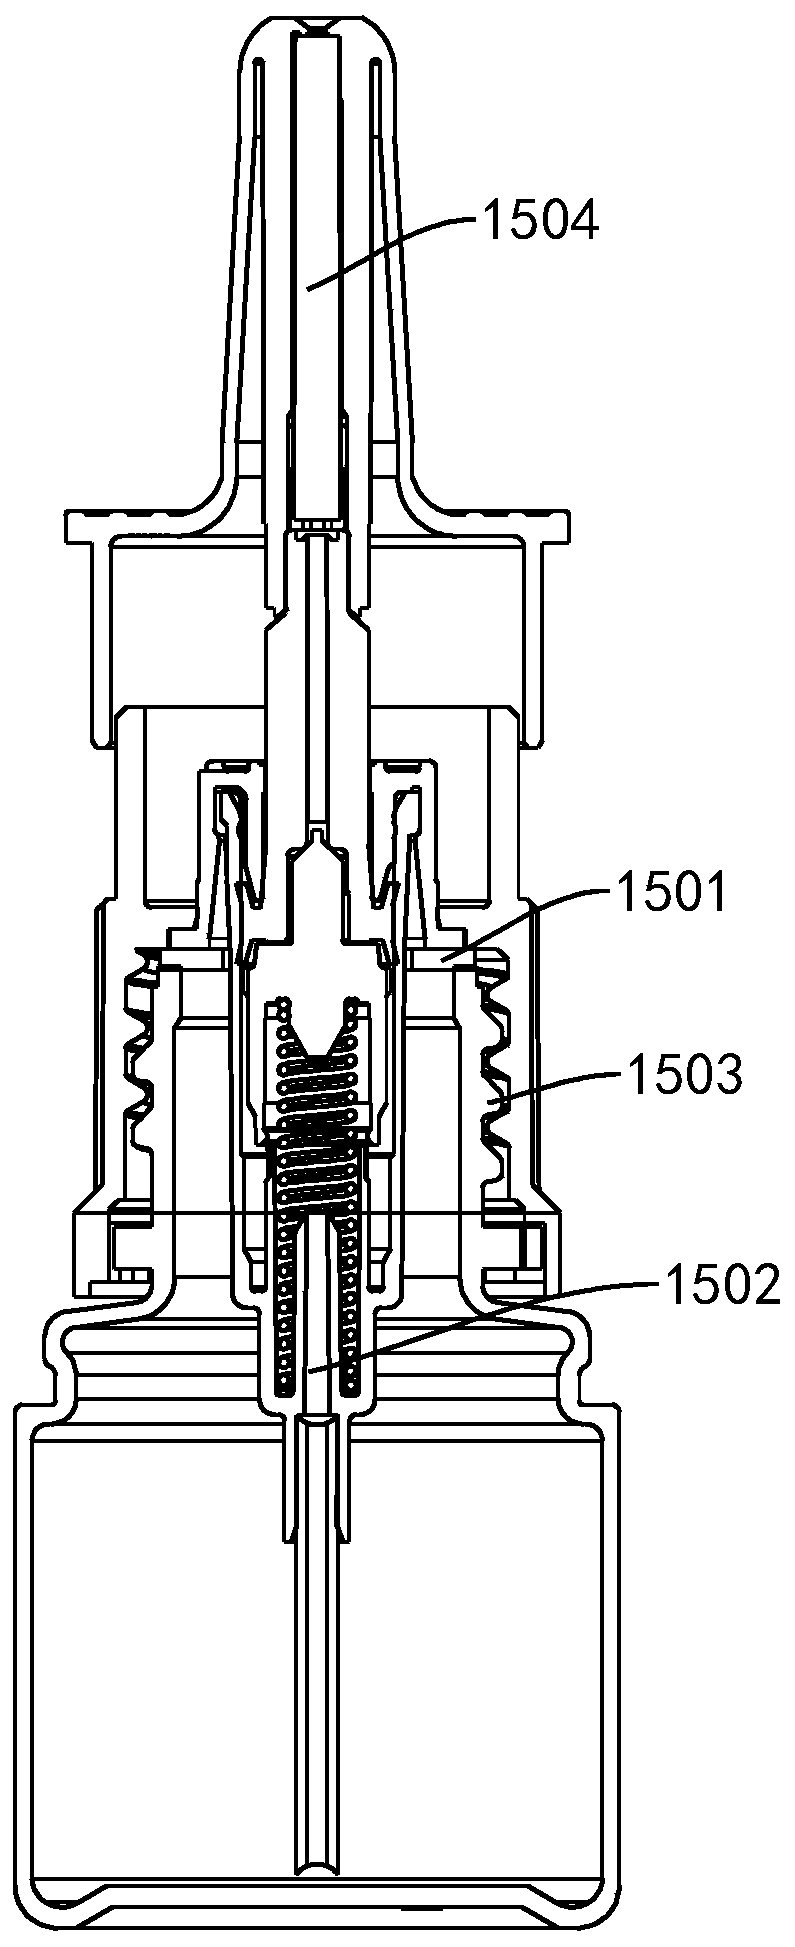 Assembly detection equipment for nasal cavity spray pump